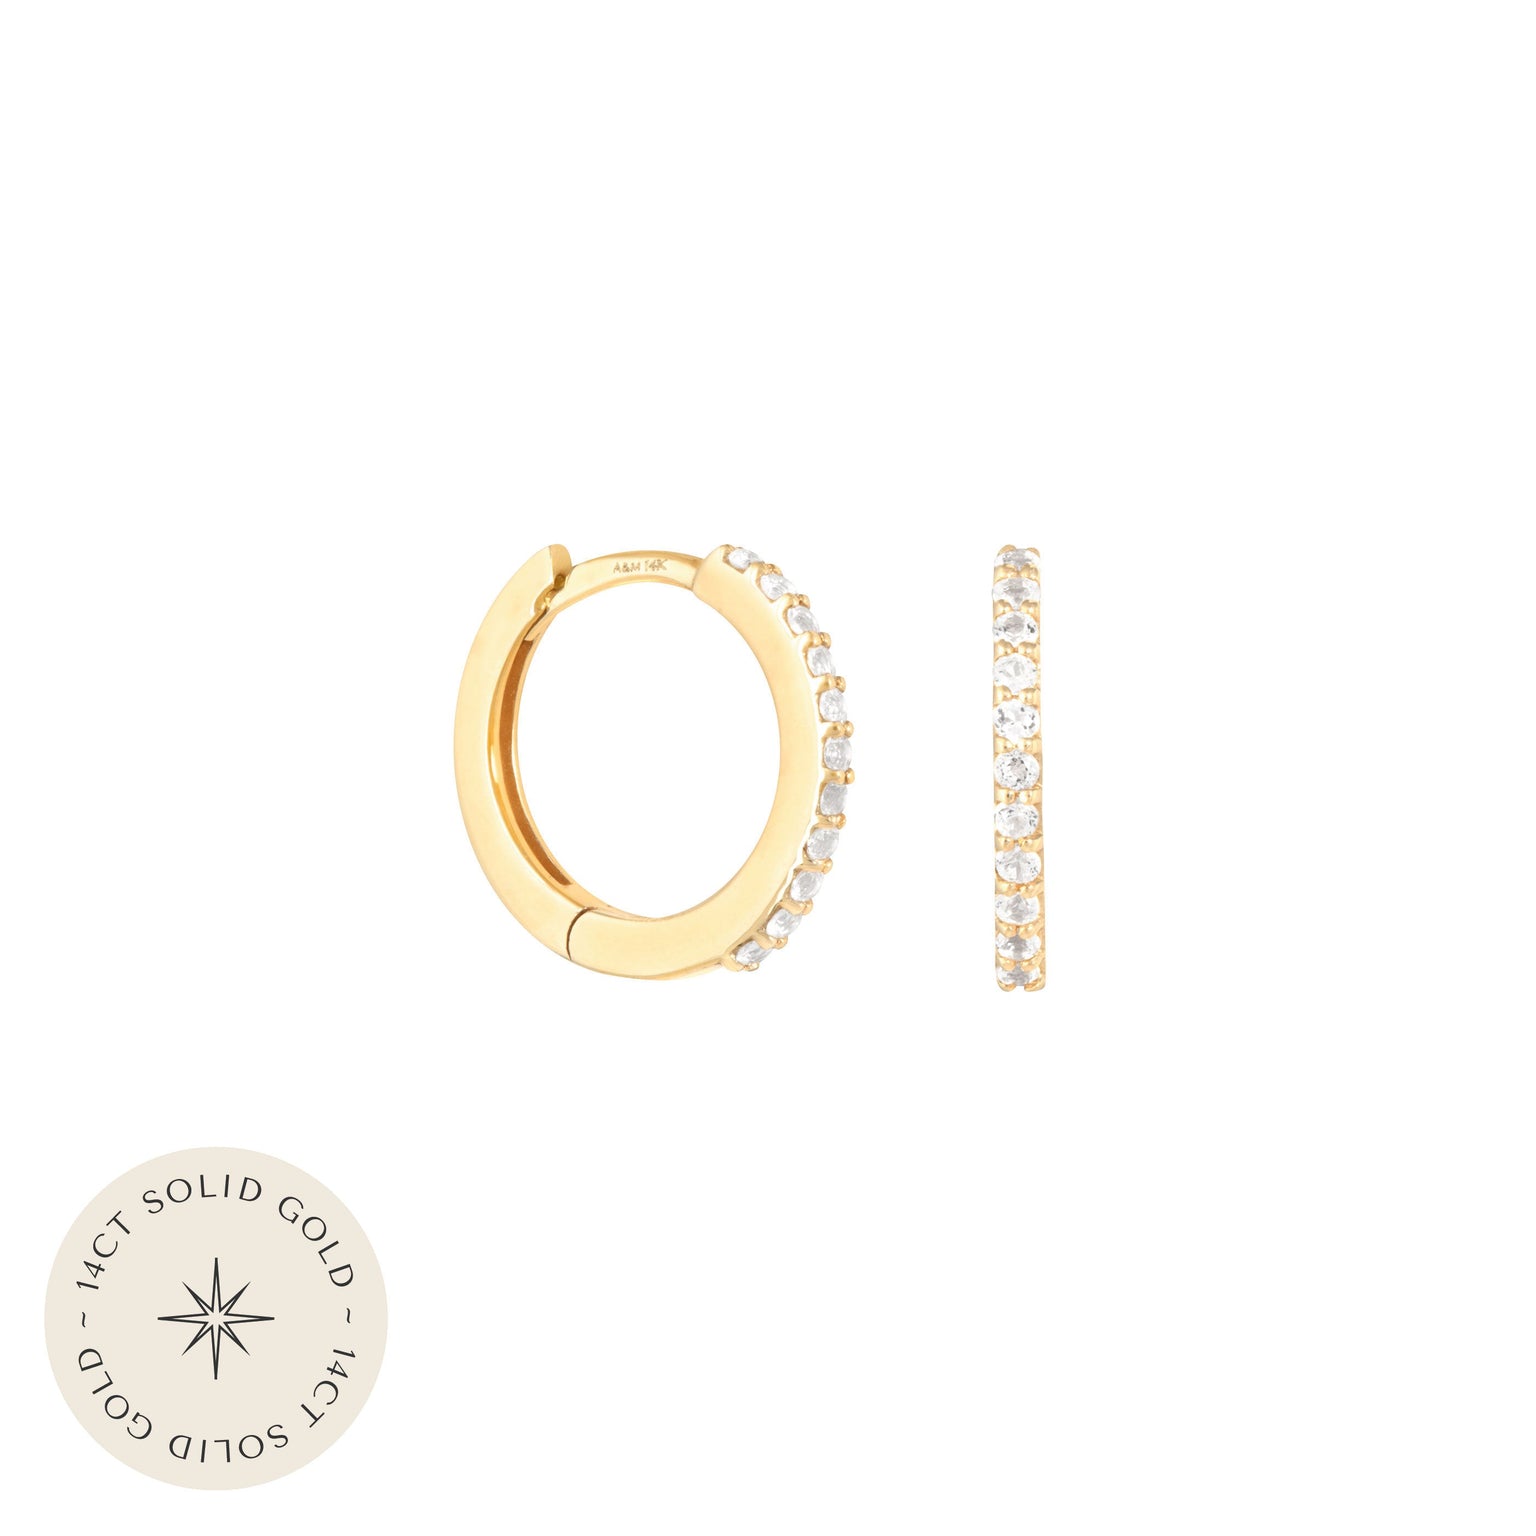 Topaz Hoops in Solid Gold with 14CT solid gold label